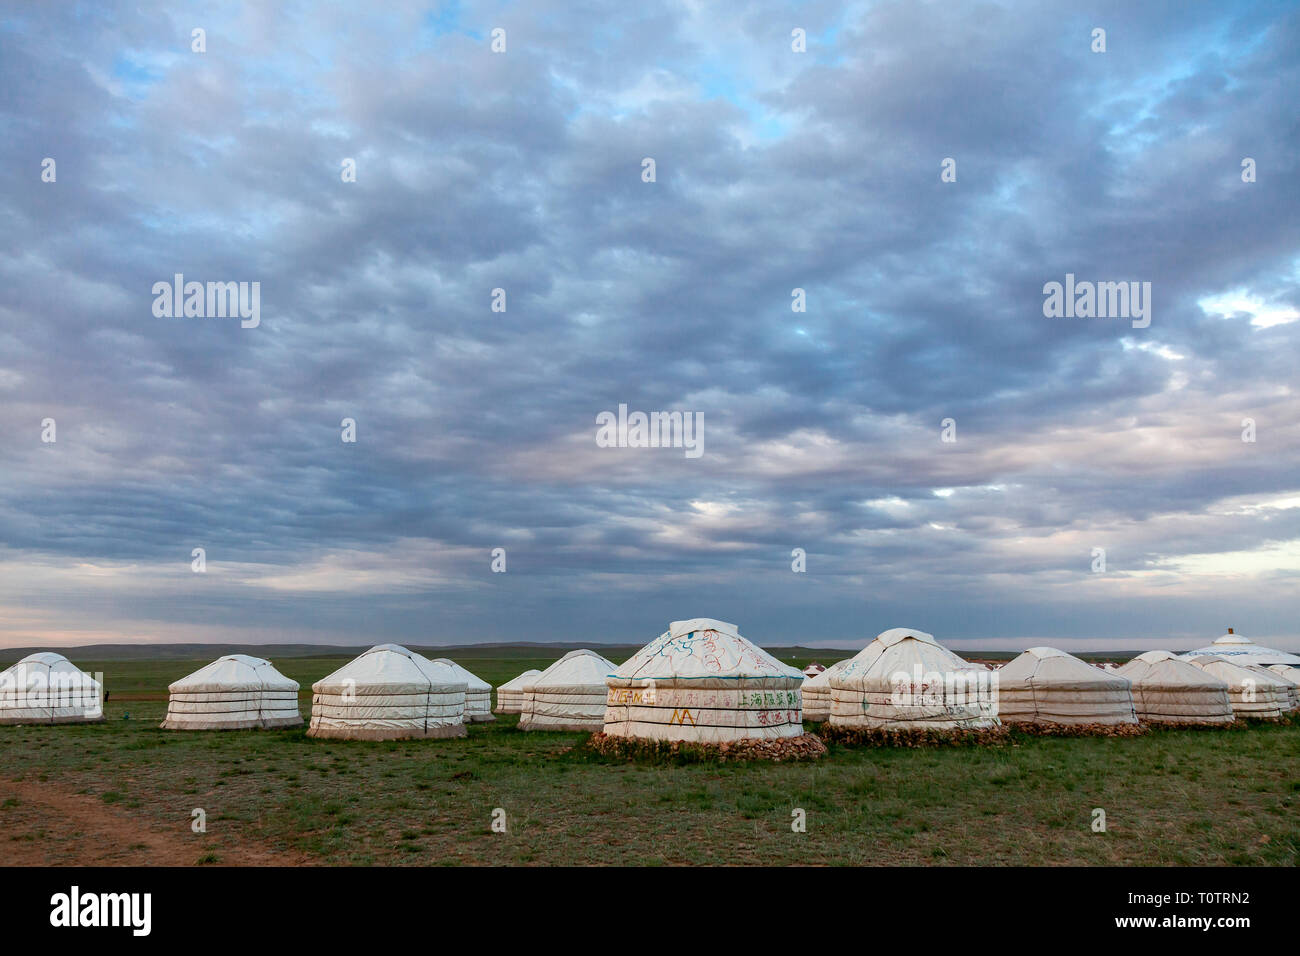 A ger (yurt) camp on the Gegentala grasslands north of Hohhot in Inner Mongolia, China. Stock Photo